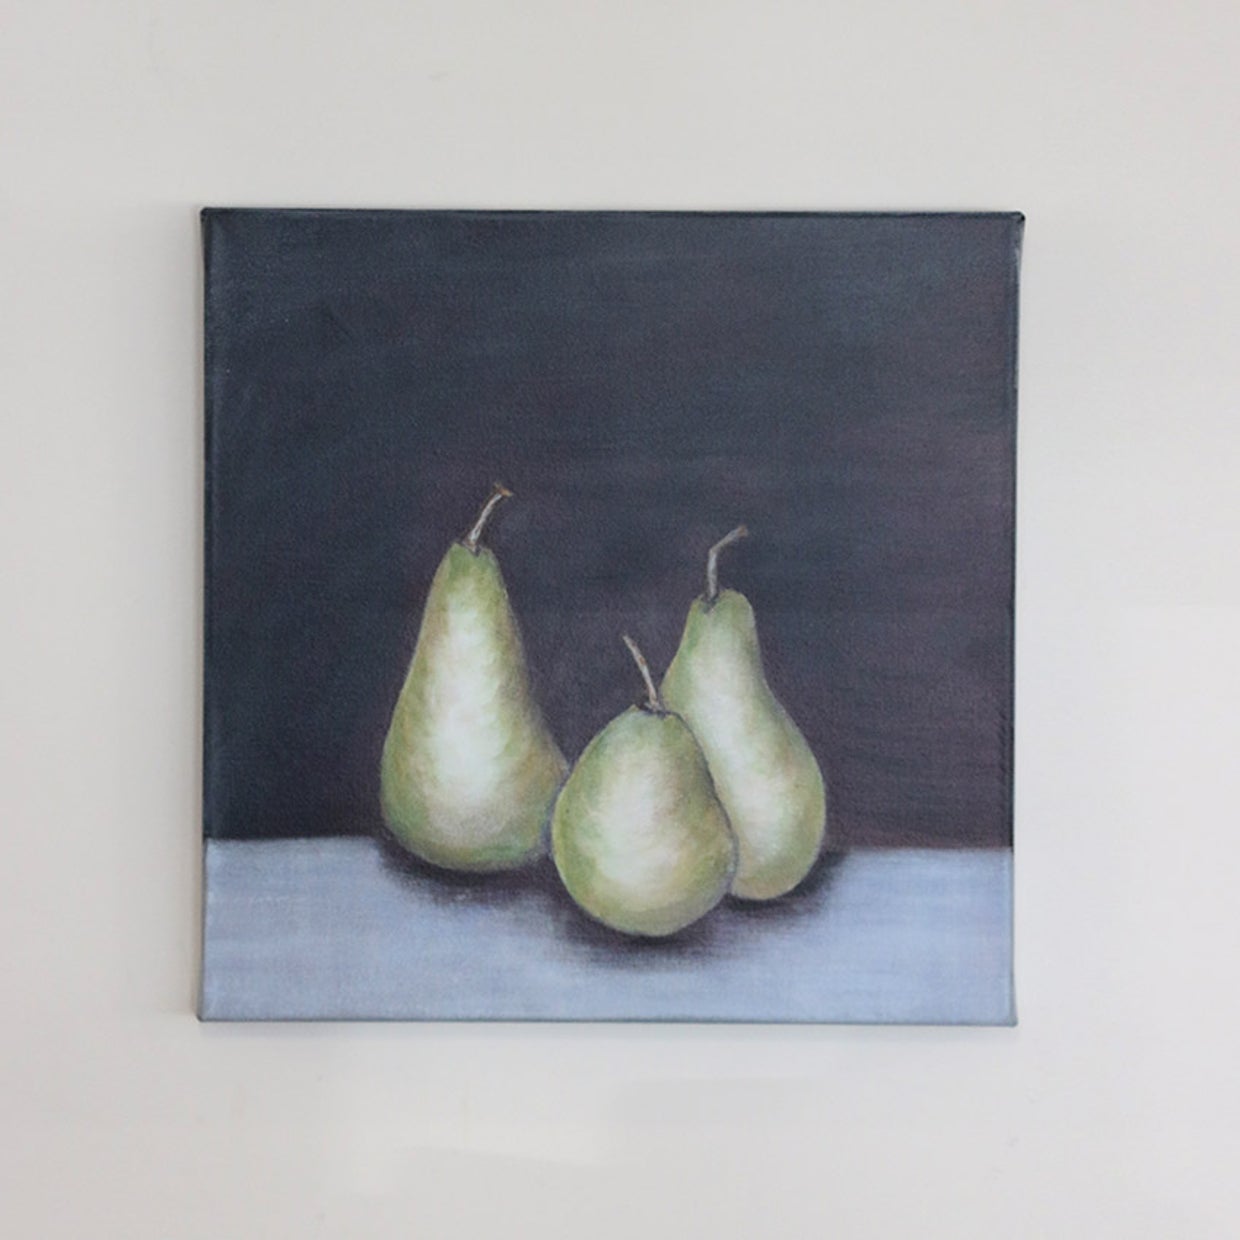 Midnight Pear on Stretched Canvas